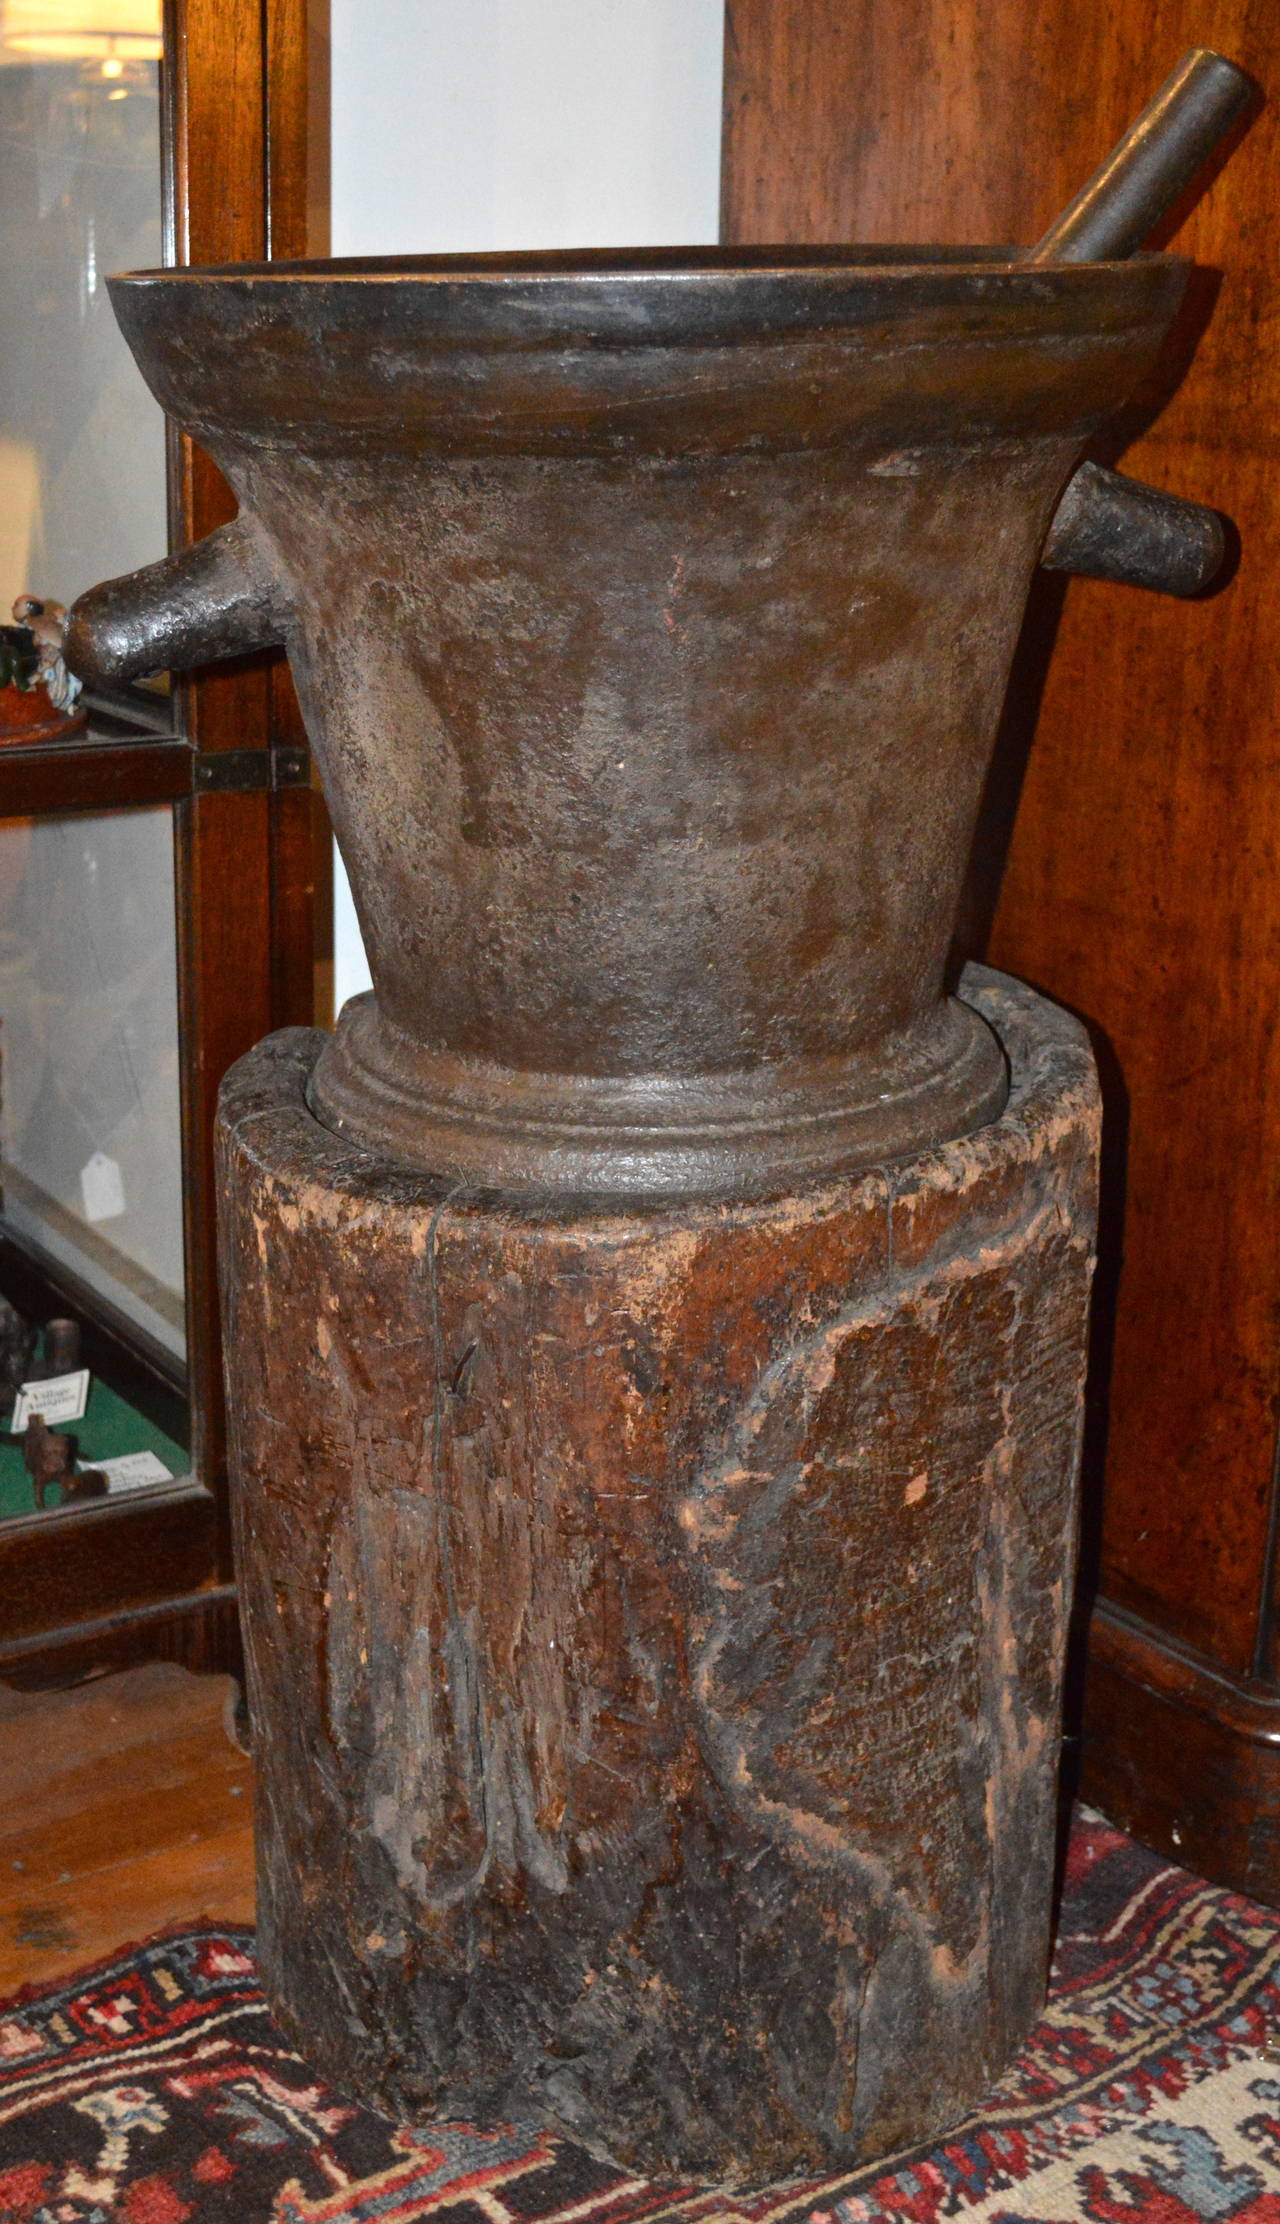 18th century unusually large cast iron mortar and pestle on a rough hewn tree stump with leather and wood cover. Probably an apothecary trade sign. Found in France.